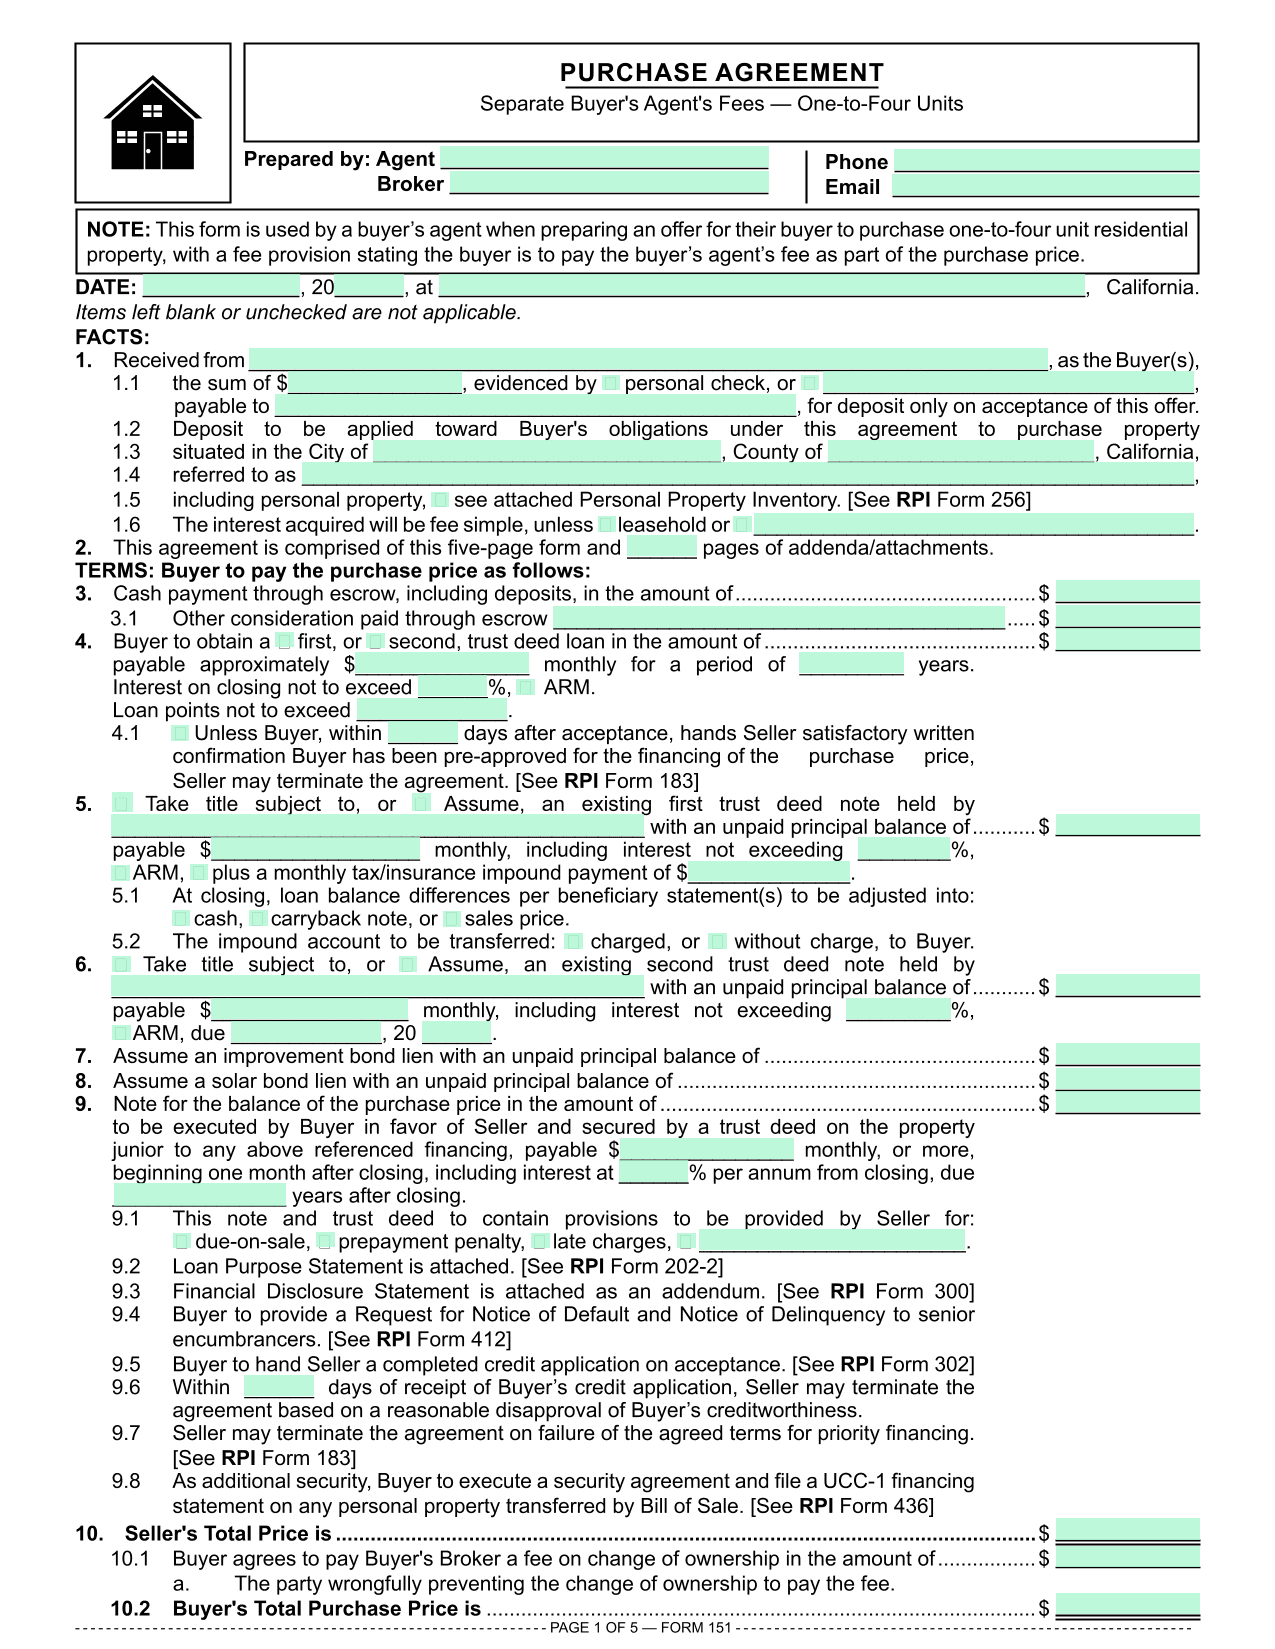 Residential Purchase Agreement (RPI 151) screenshot